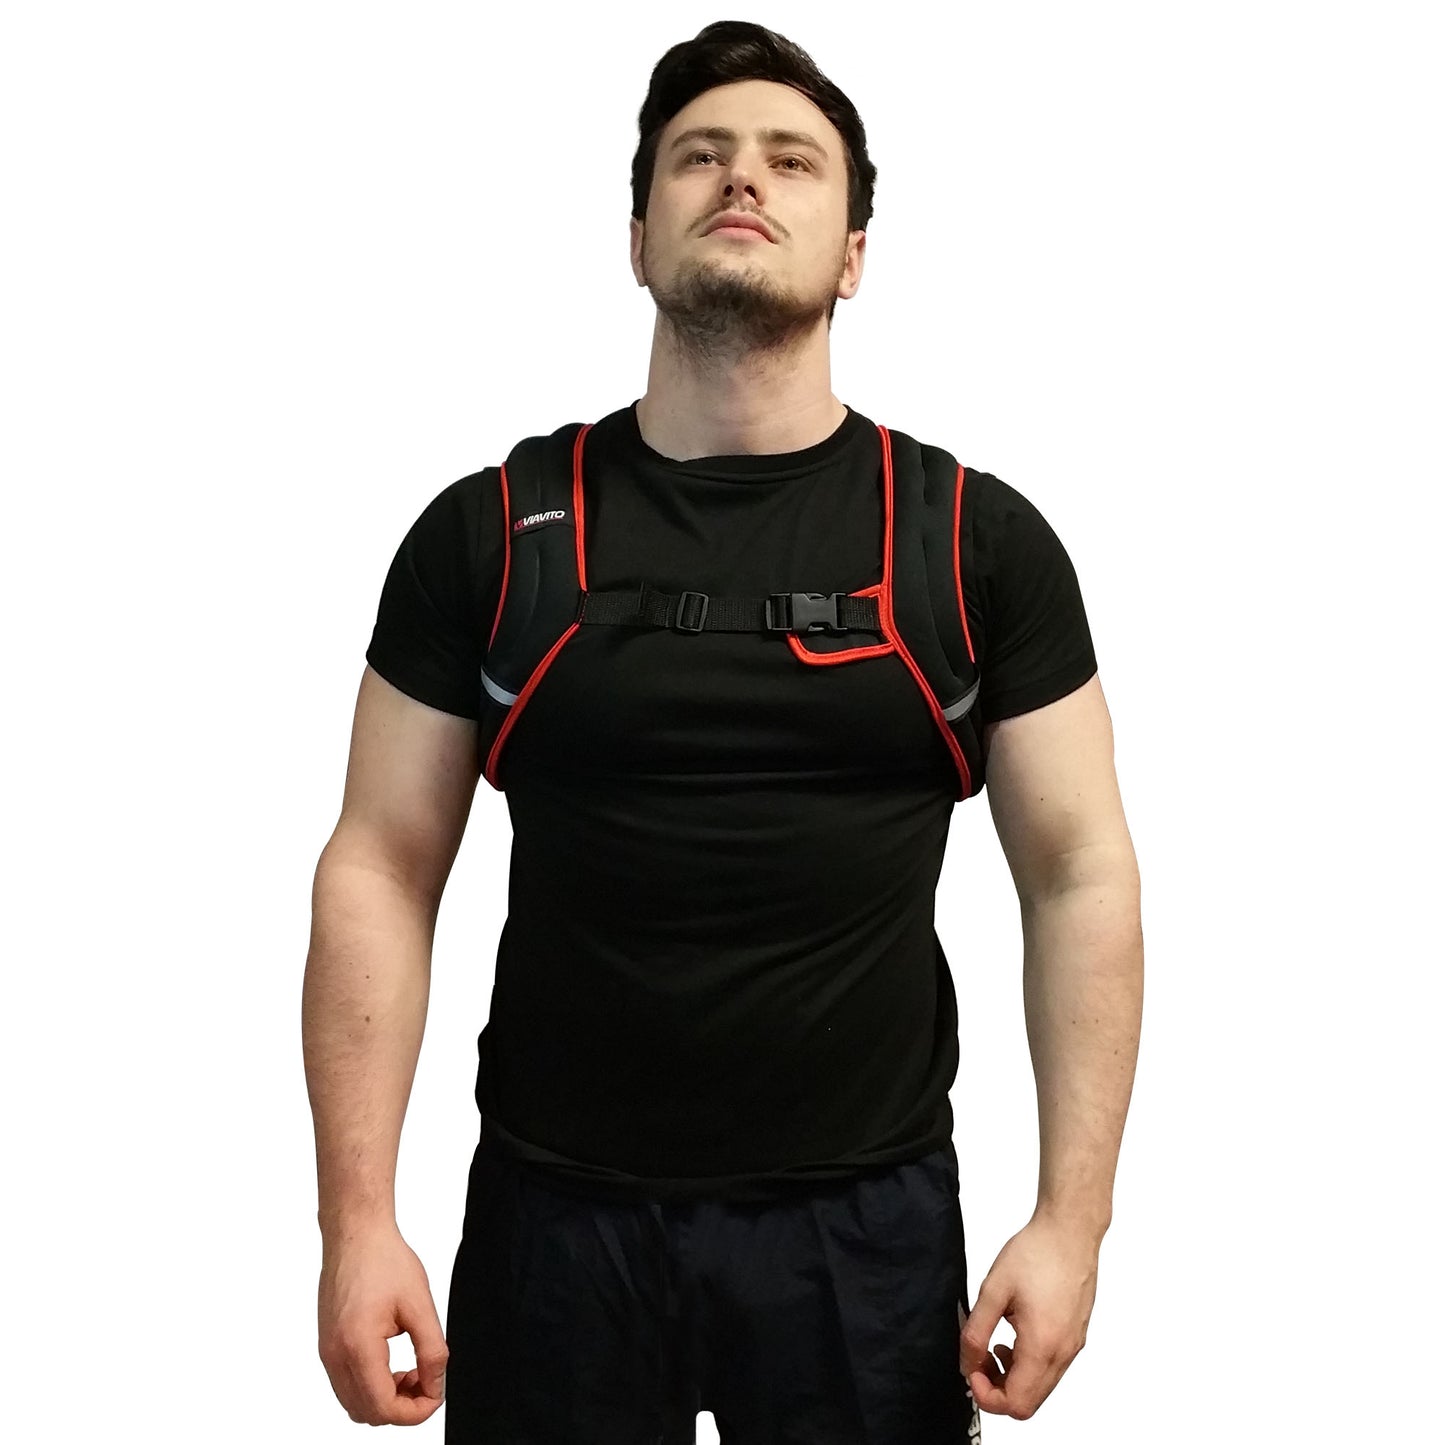 |Viavito 5kg Weighted Vest - Main|